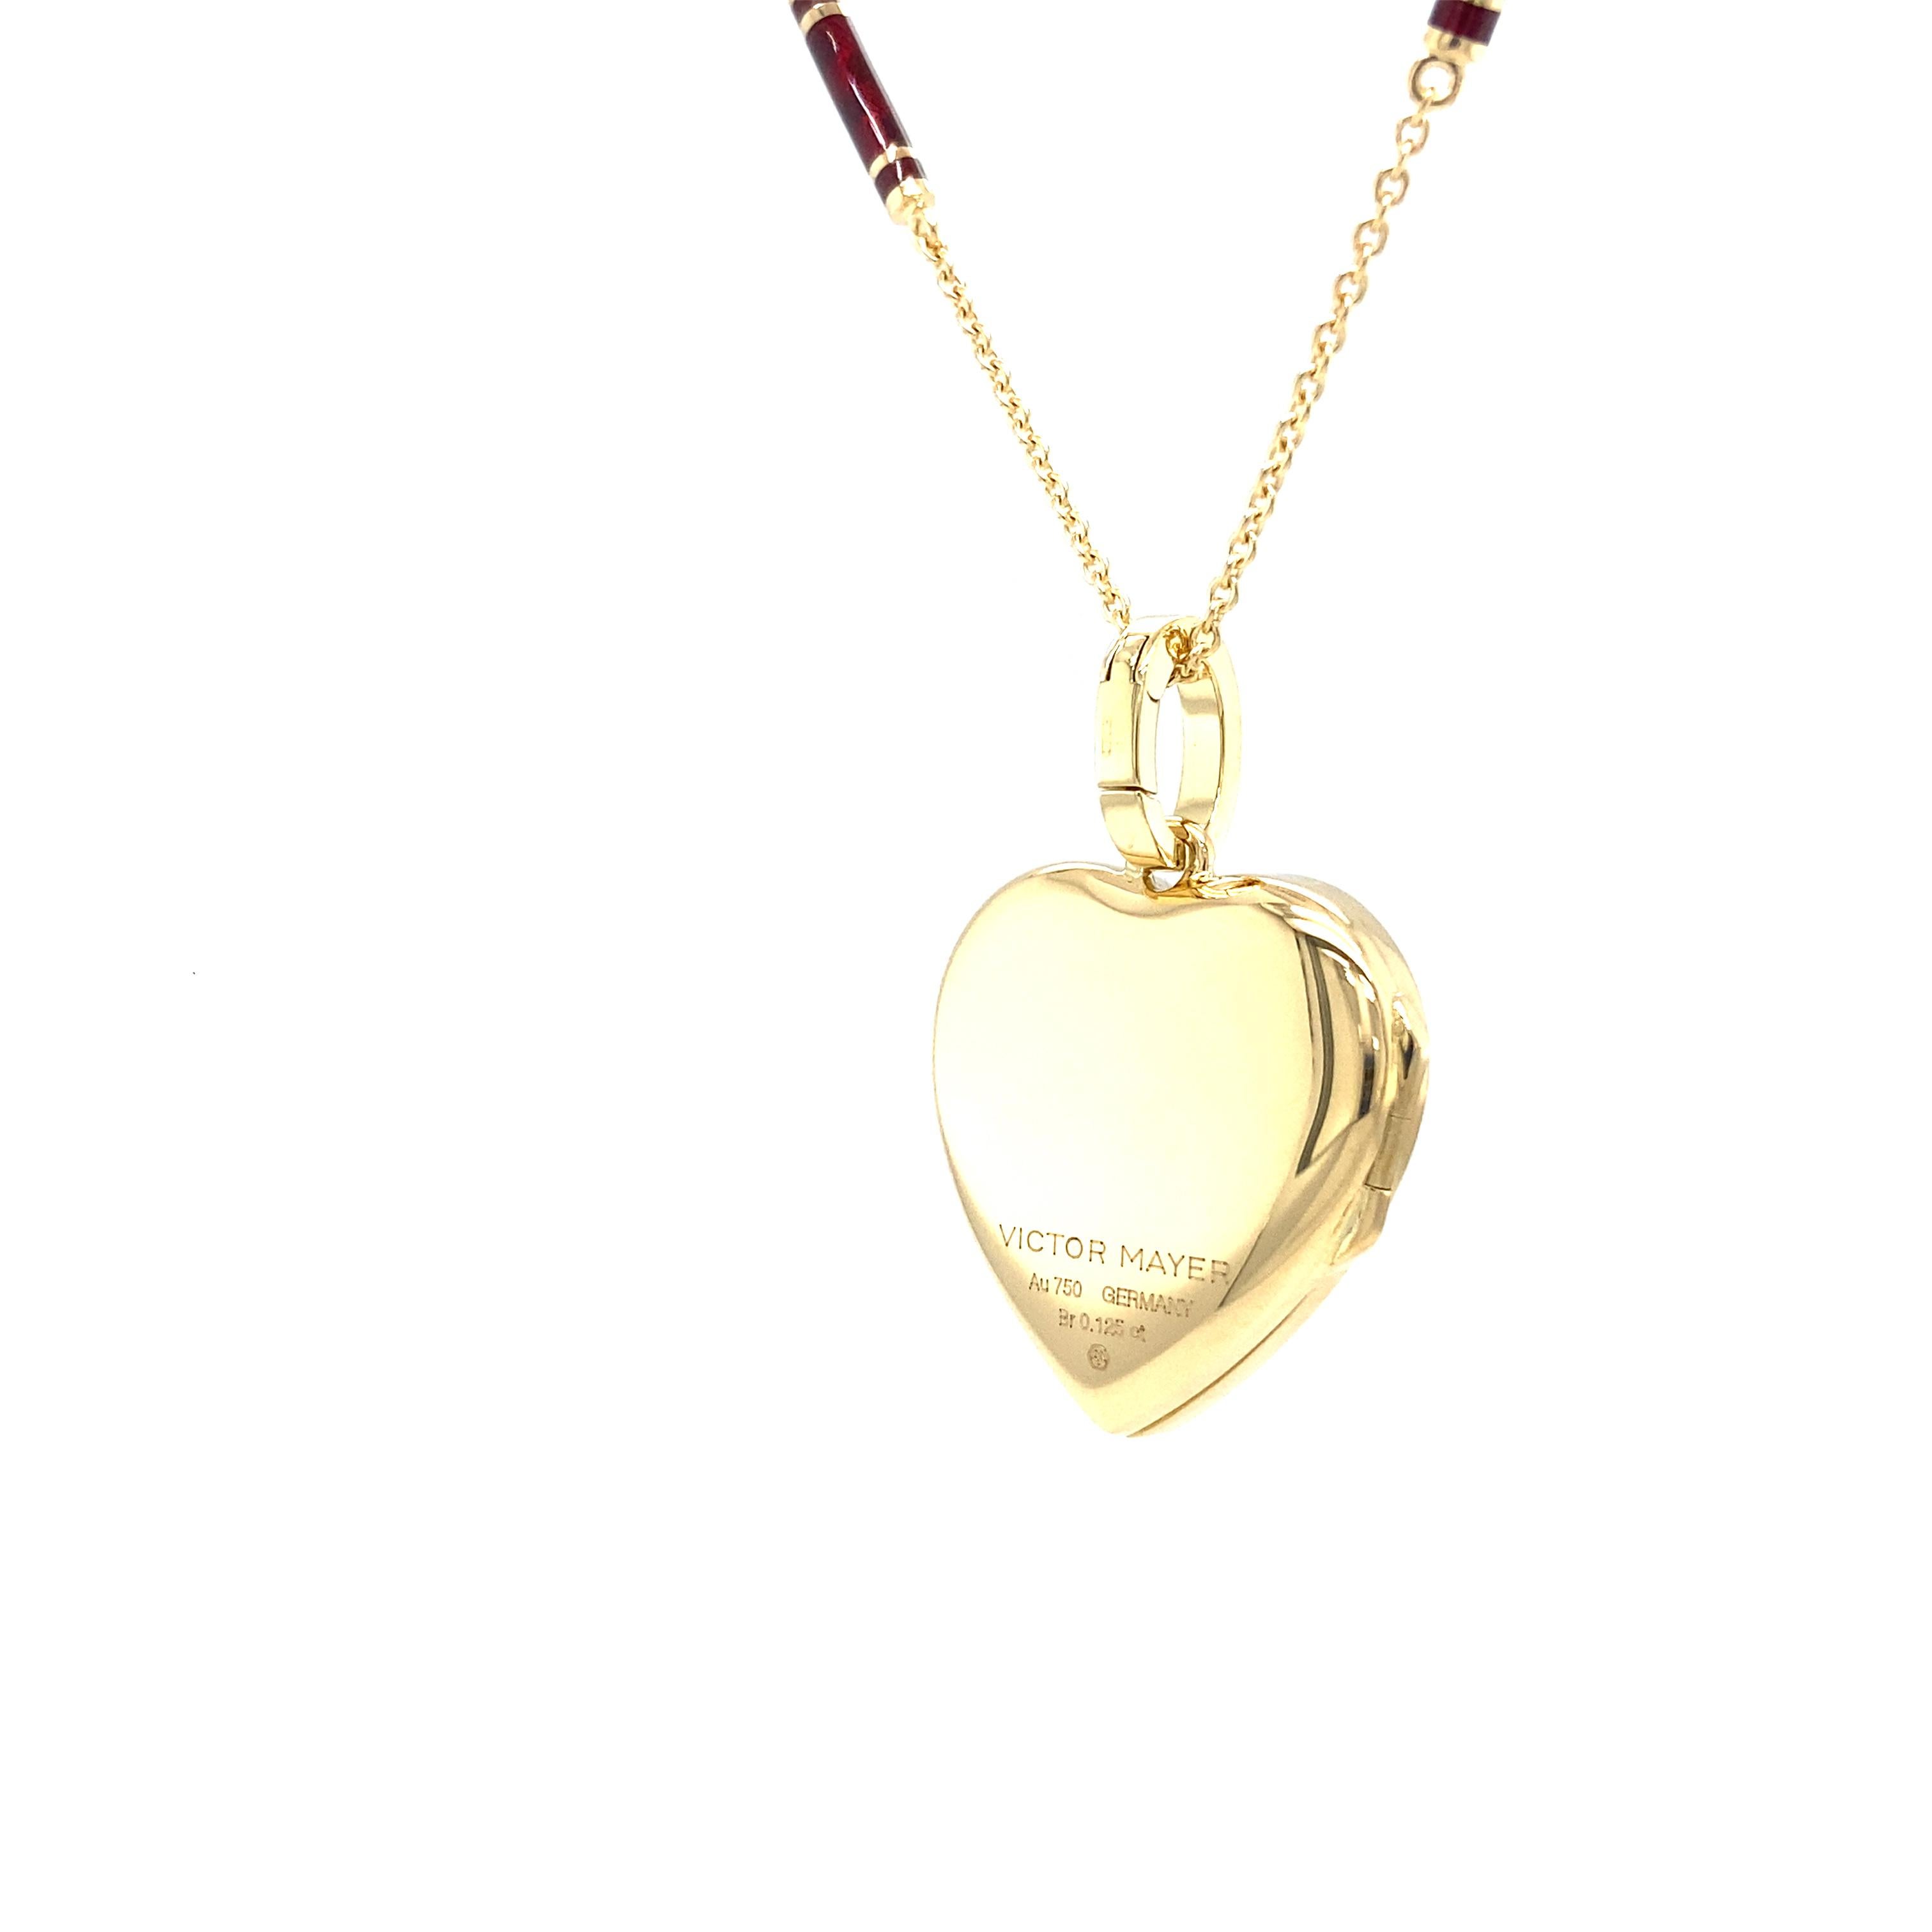 Victor Mayer heart shaped locket pendant, 18k yellow gold, pink and burgundy red vitreous enamel, 6 diamonds, total 0.12 ct, H VS

About the creator Victor Mayer 
Victor Mayer is internationally renowned for elegant timeless designs and unrivalled